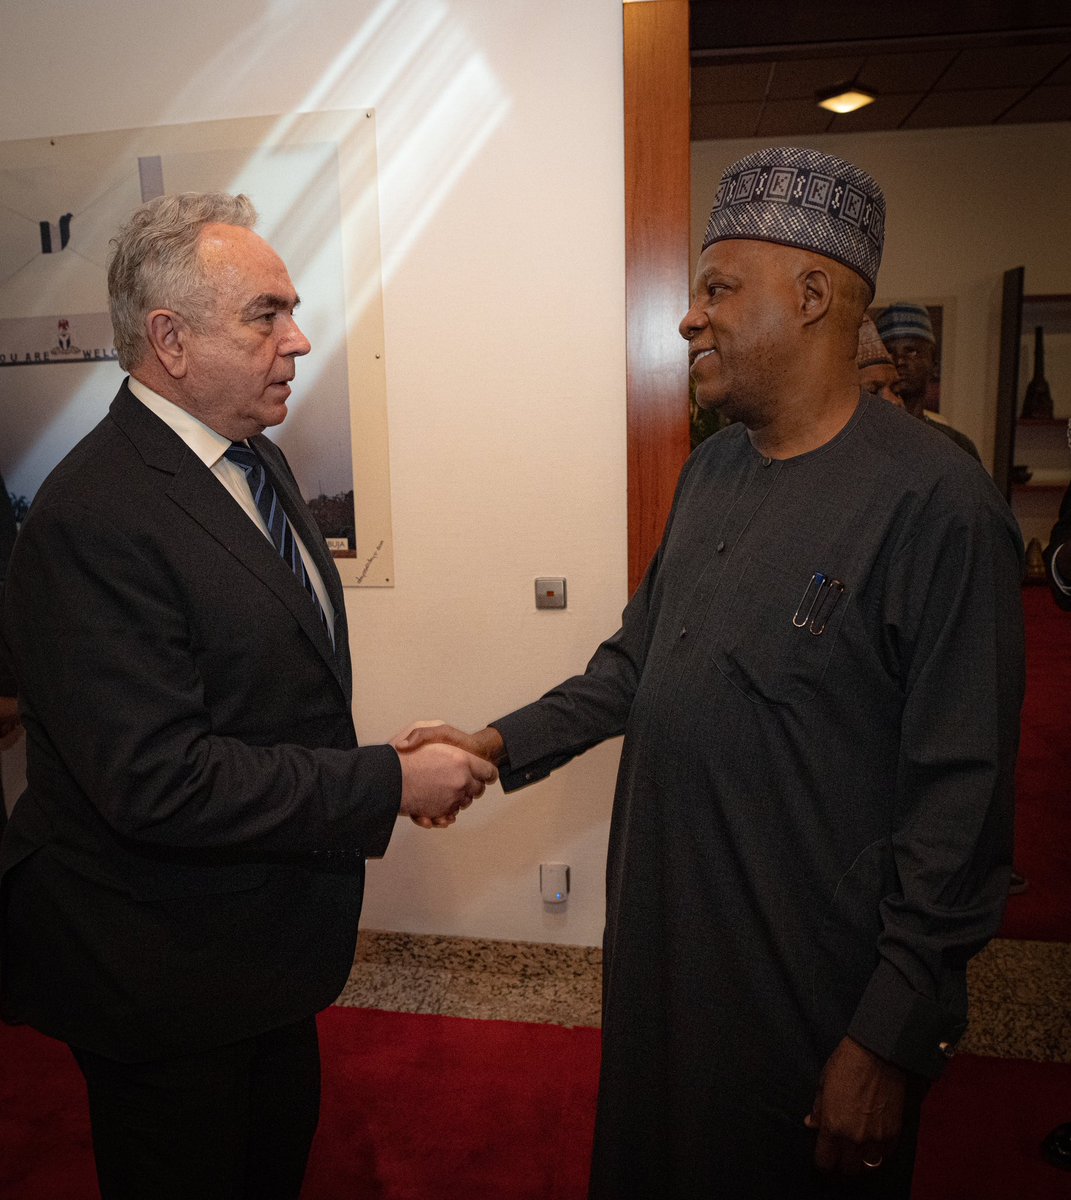 The U.S. & Nigeria are working together to address shared challenges. Delighted to meet VP @KashimSM on my first trip to Africa as Deputy Secretary of State. As part of the U.S.-Nigeria Binational Commission, we discussed Nigeria’s progress on economic reforms, security, and…